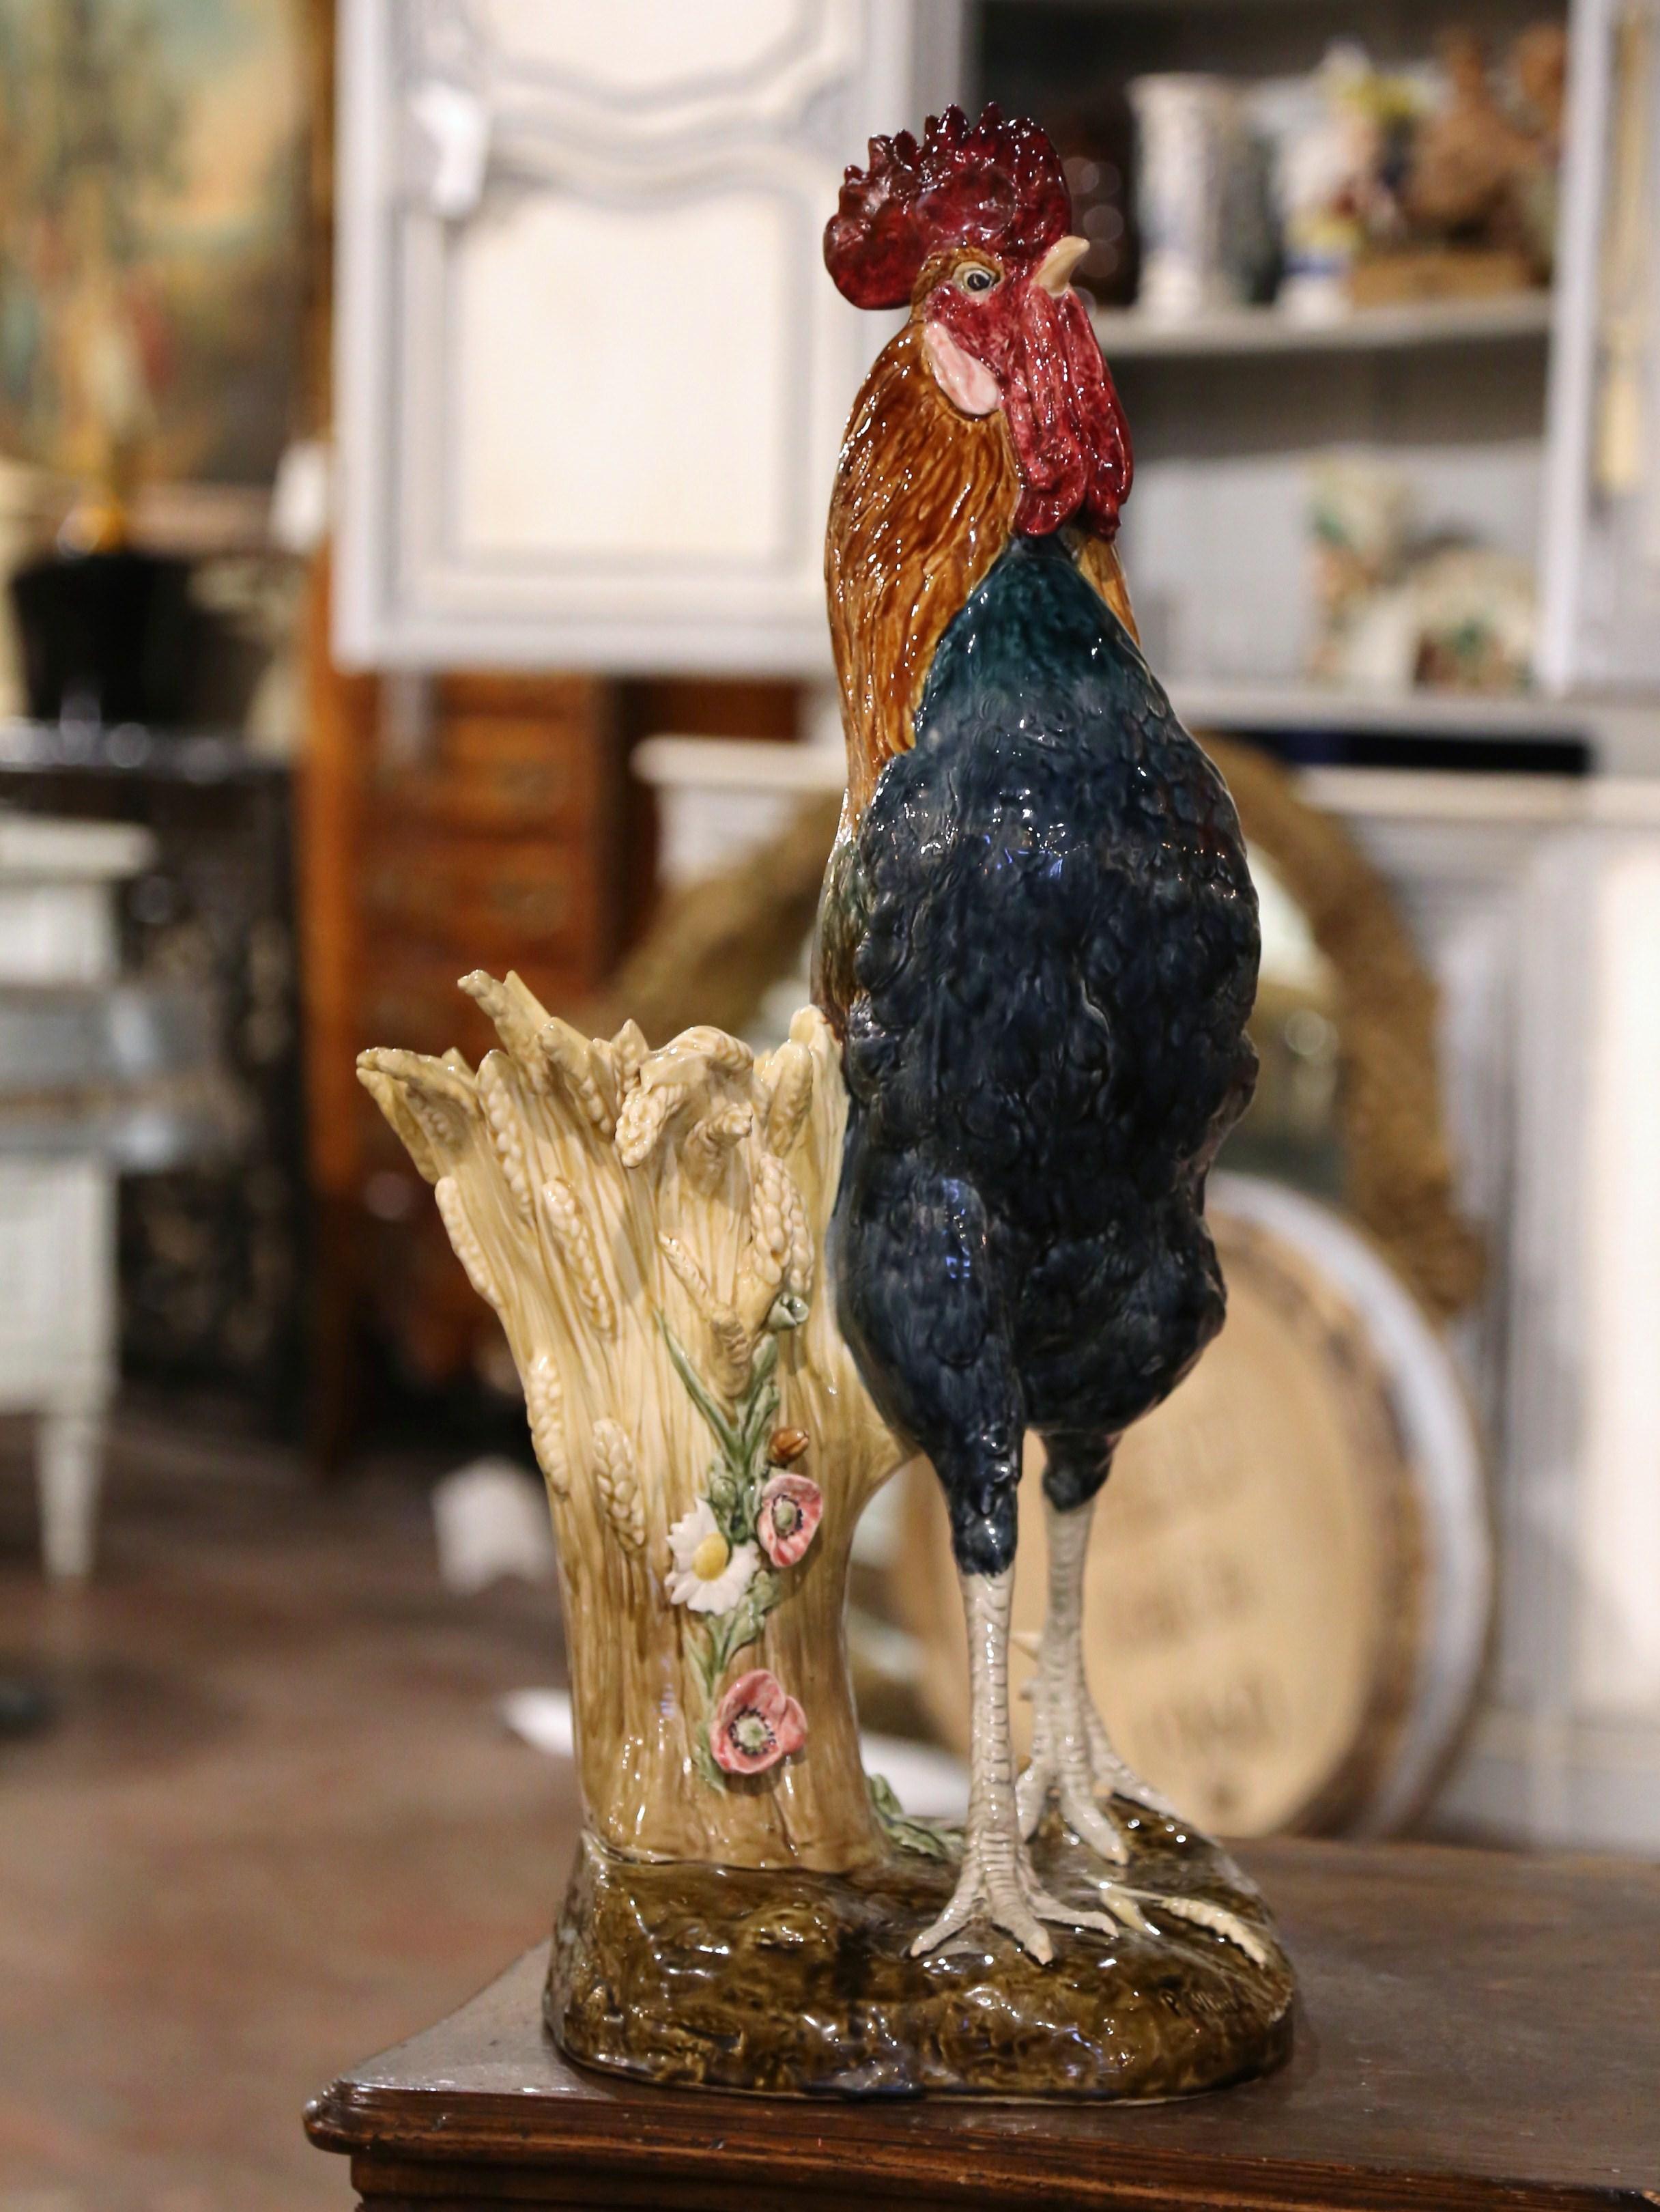 Add the charm of the French countryside to your home with this large, colorful and rare ceramic rooster sculpture. Crafted in France circa 1880, the Majolica composition is at once a flower vase and a rooster sculpture. The elegant faience piece